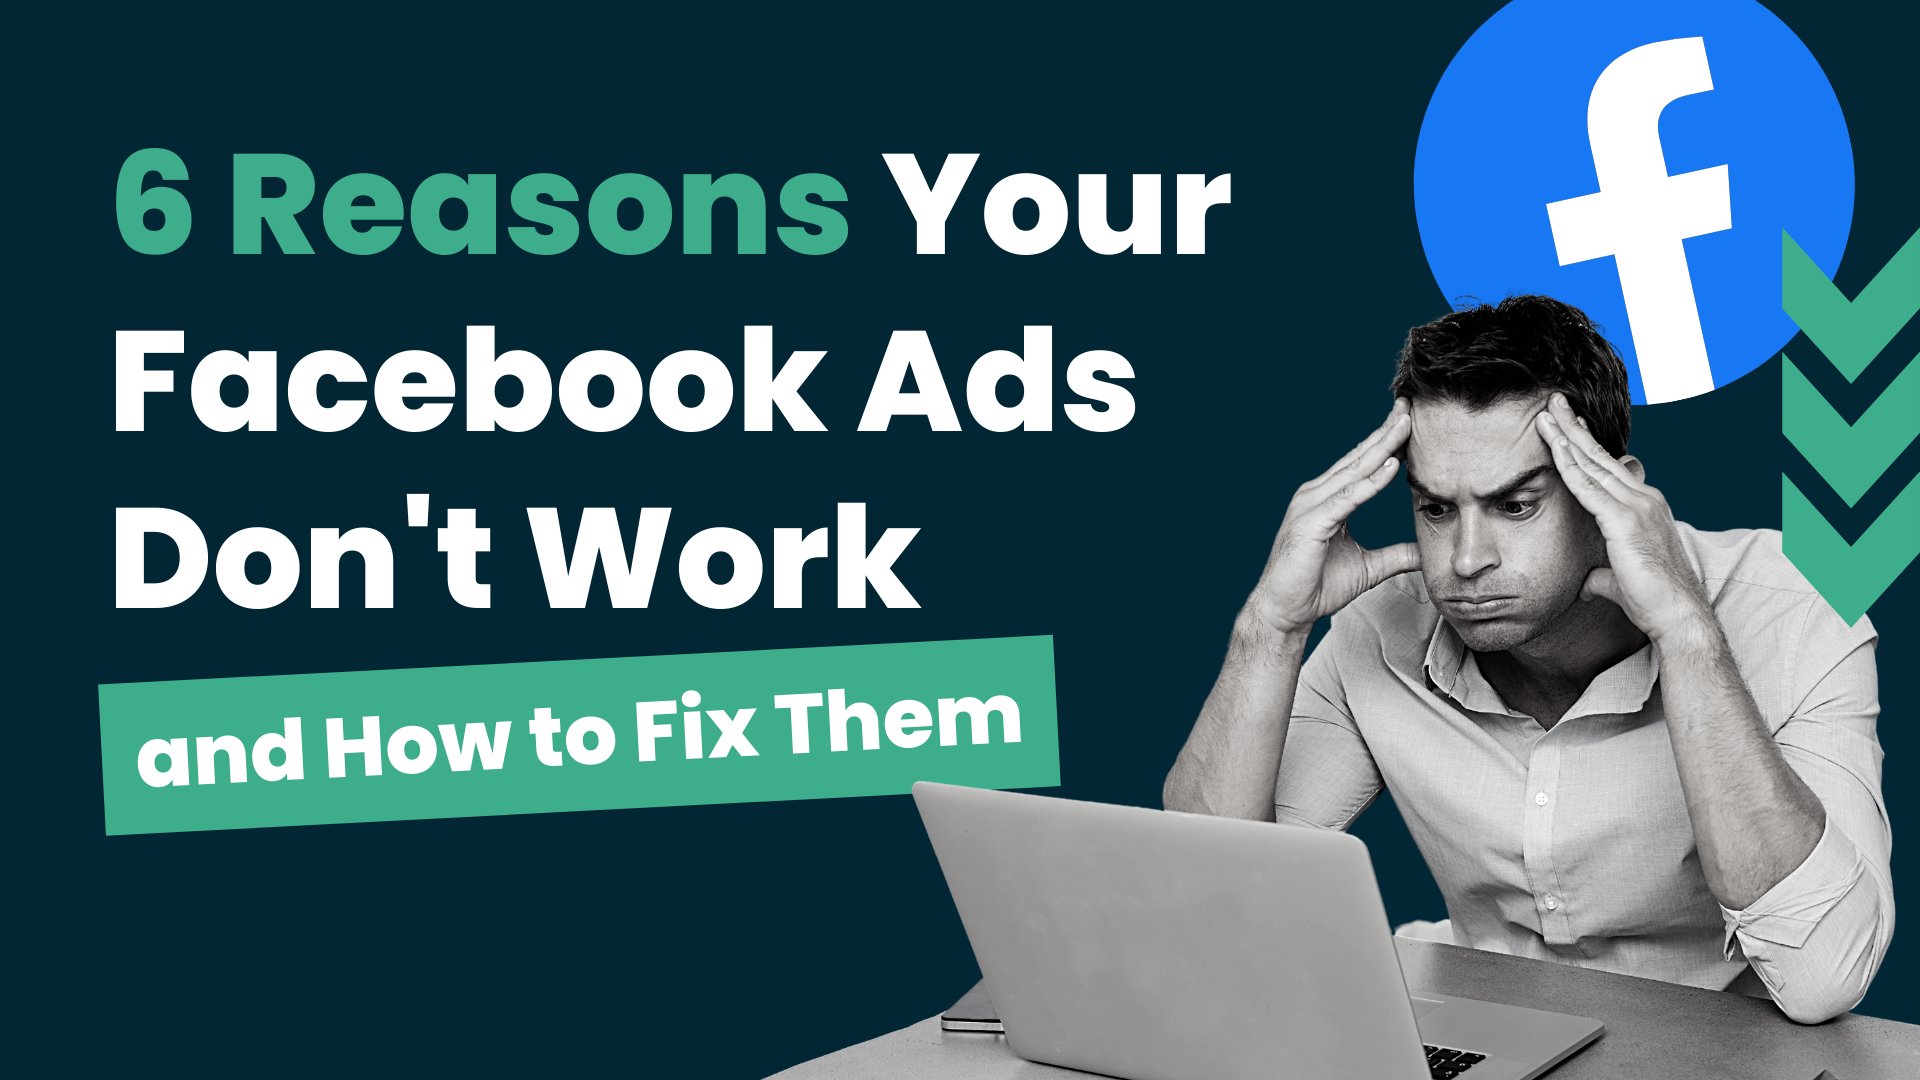 6 Reasons Your Facebook Ads Don’t Work And How To Fix Them